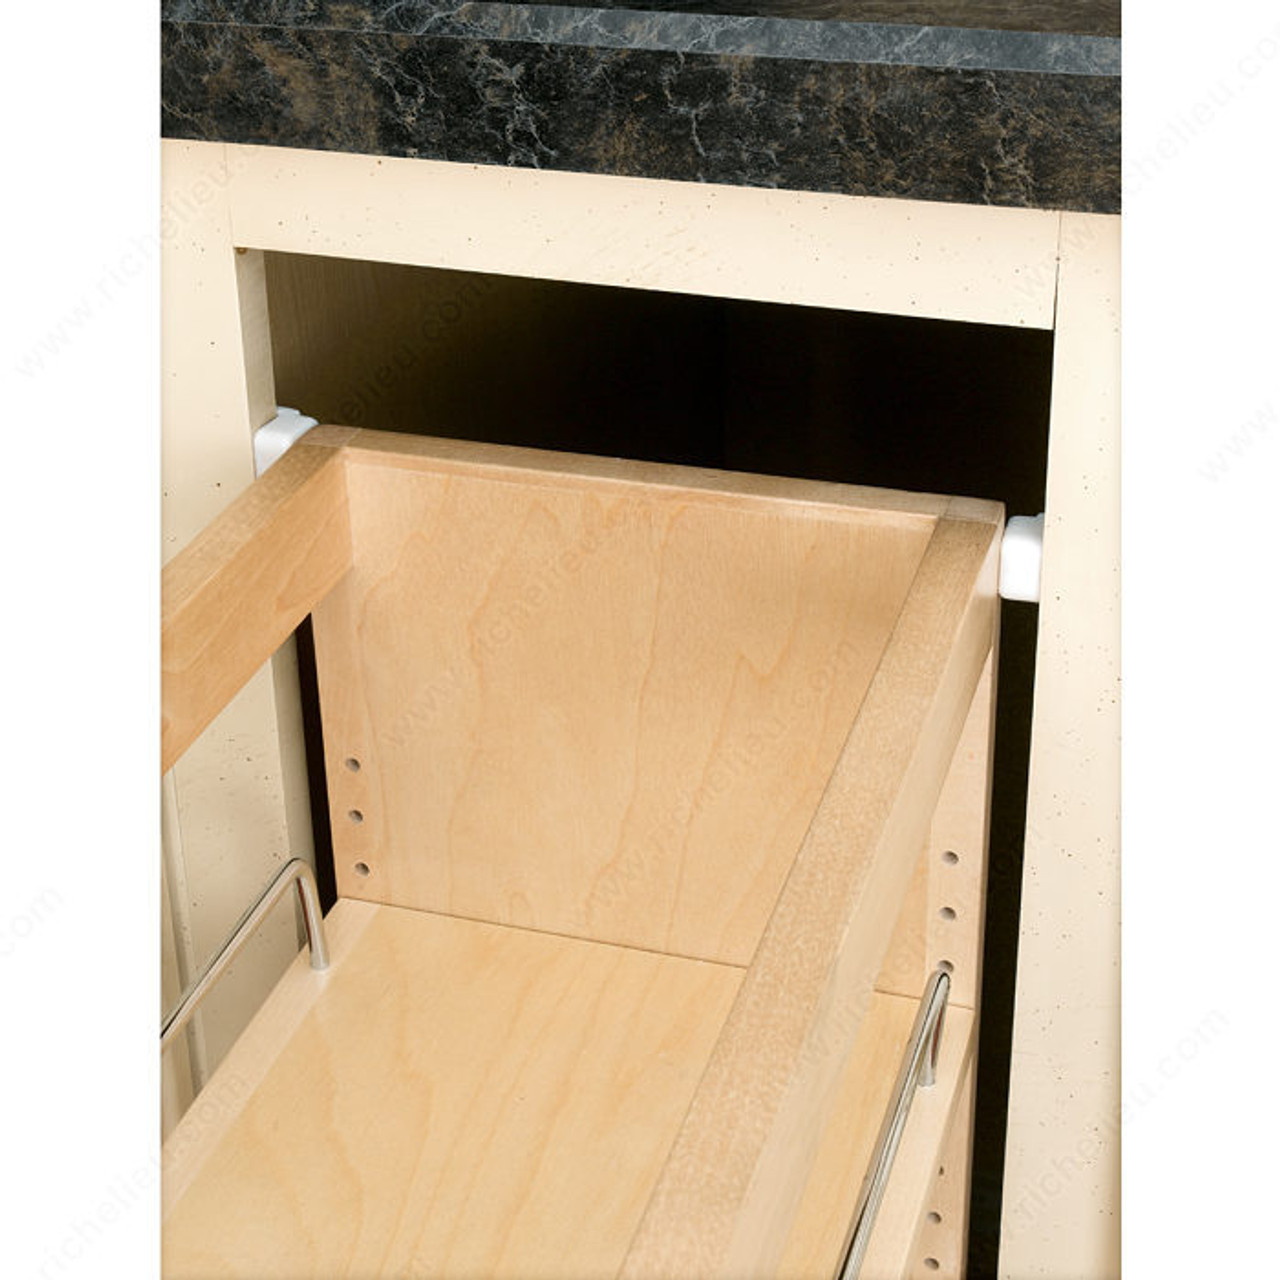 448-BC-11C - 11 Pullout Wood Base Cabinet Organizer - Express Kitchens